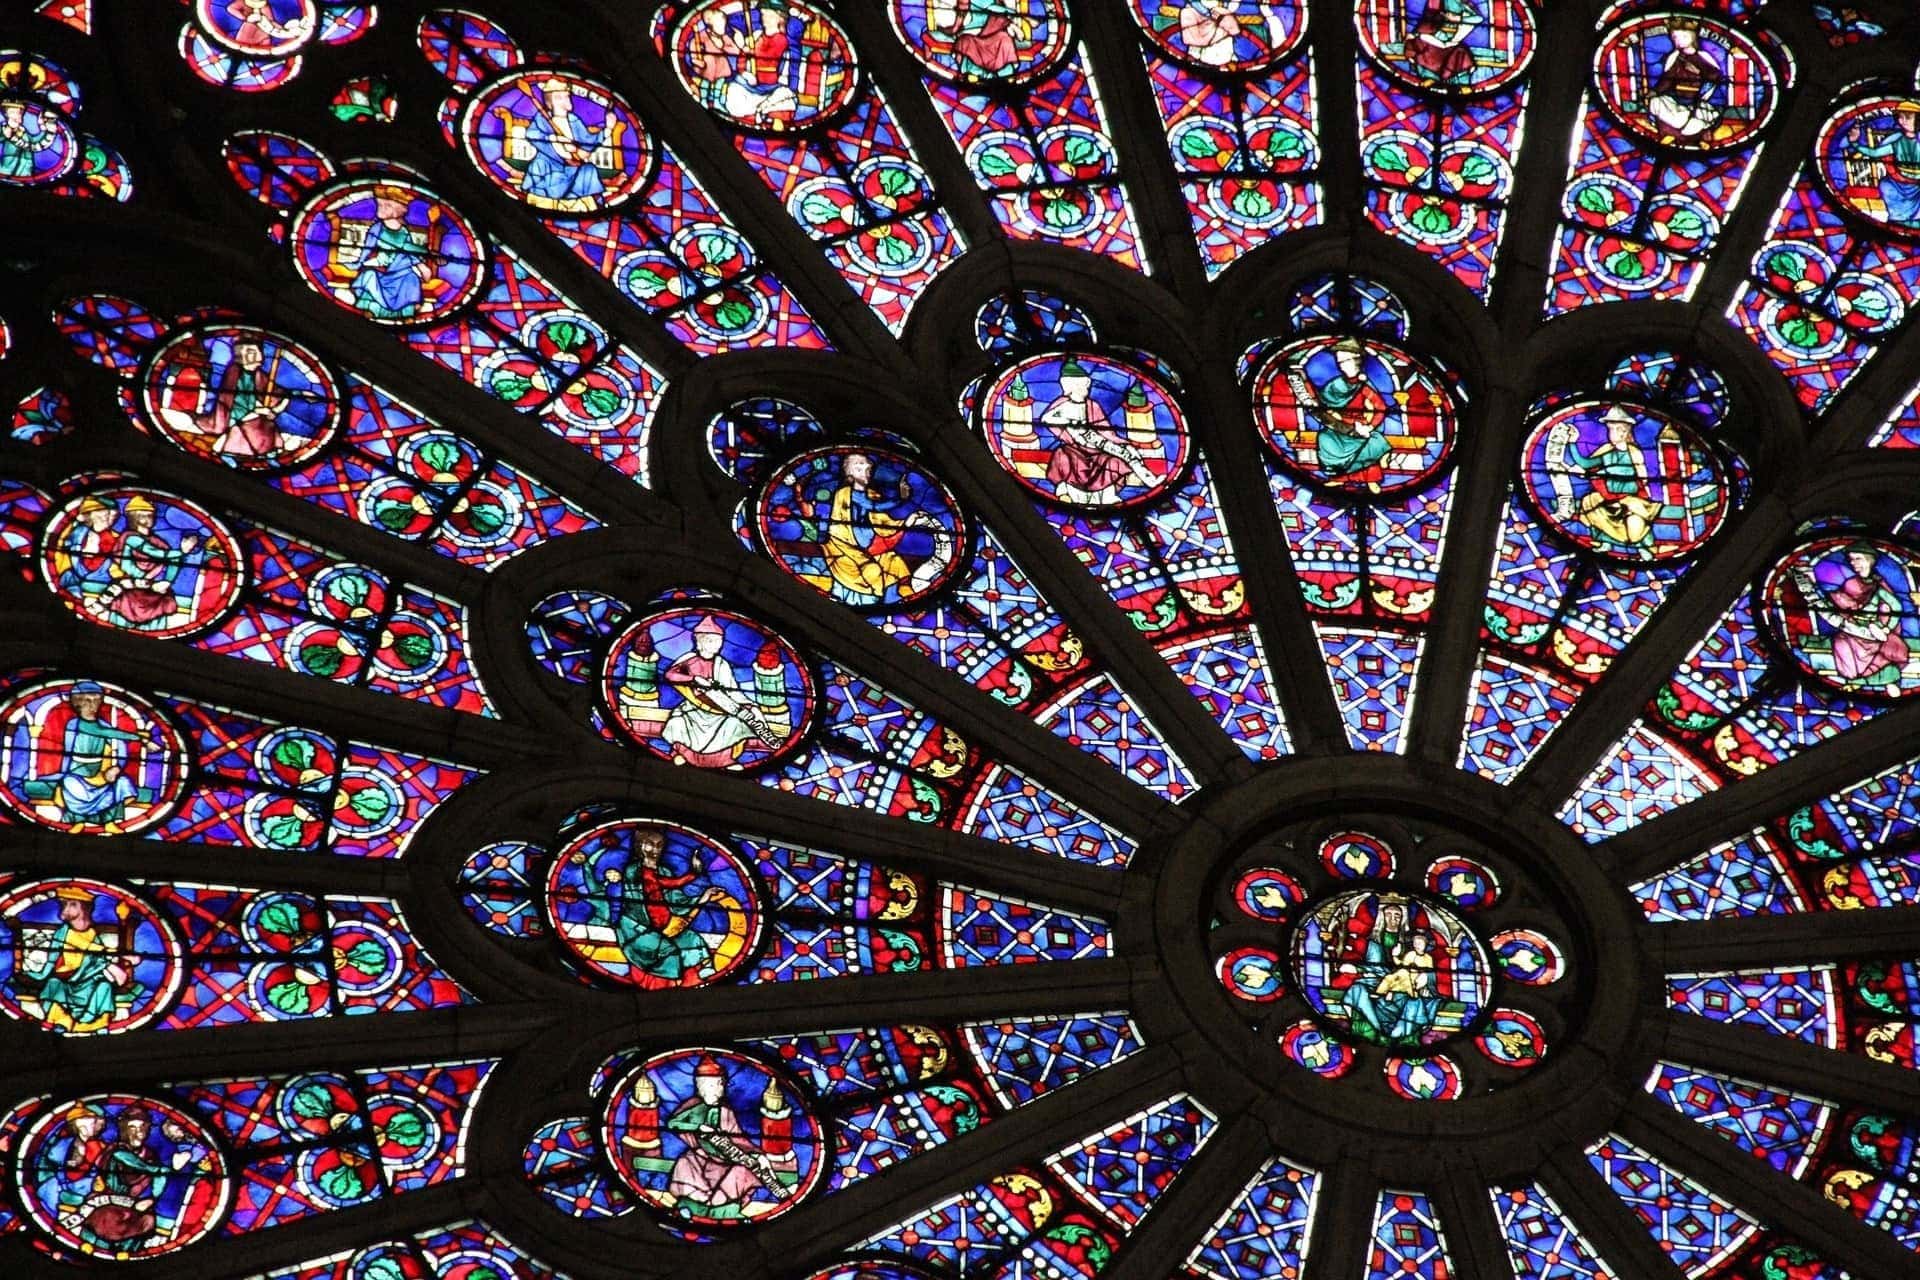 Stain-glass window from Notre Dame Cathedral